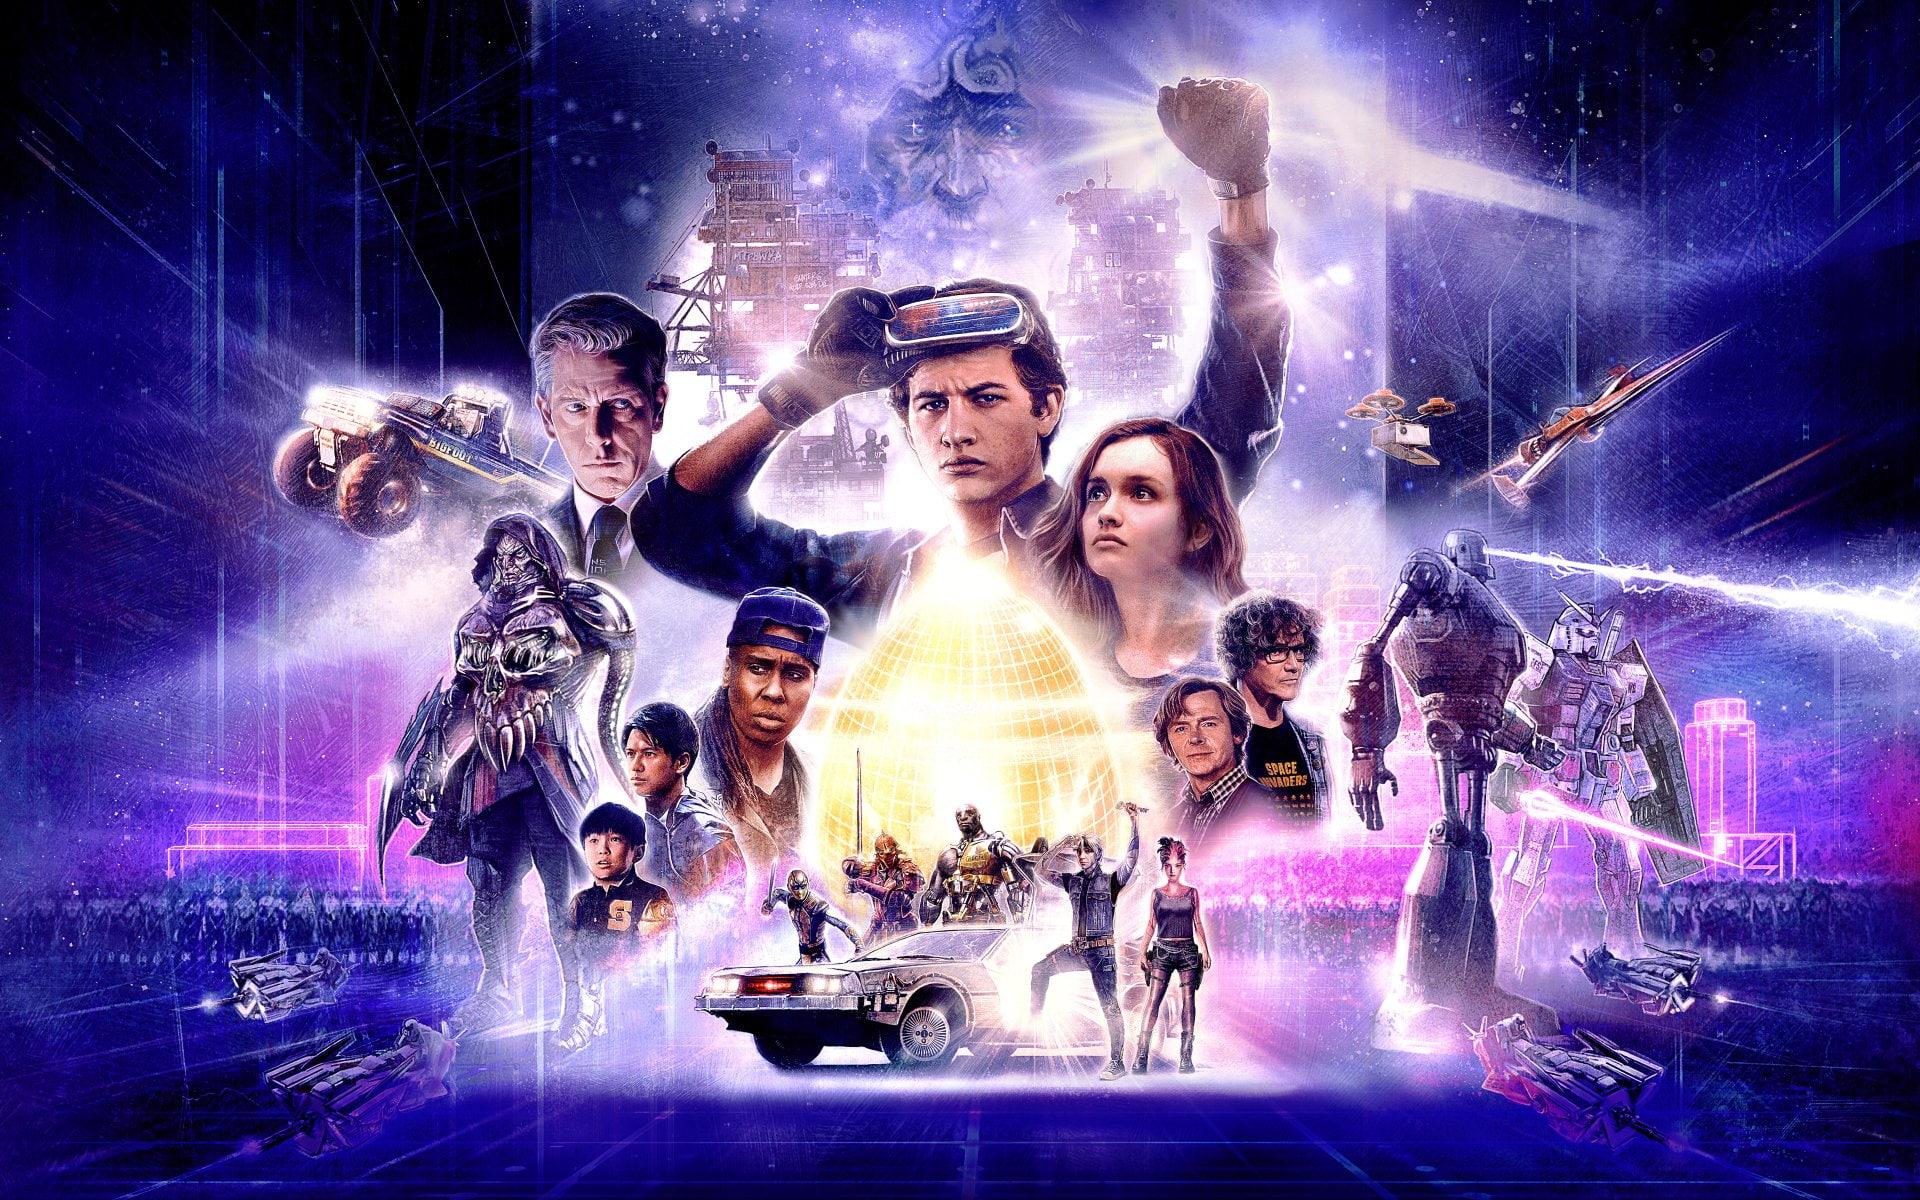 Details 58+ ready player one wallpaper - in.cdgdbentre